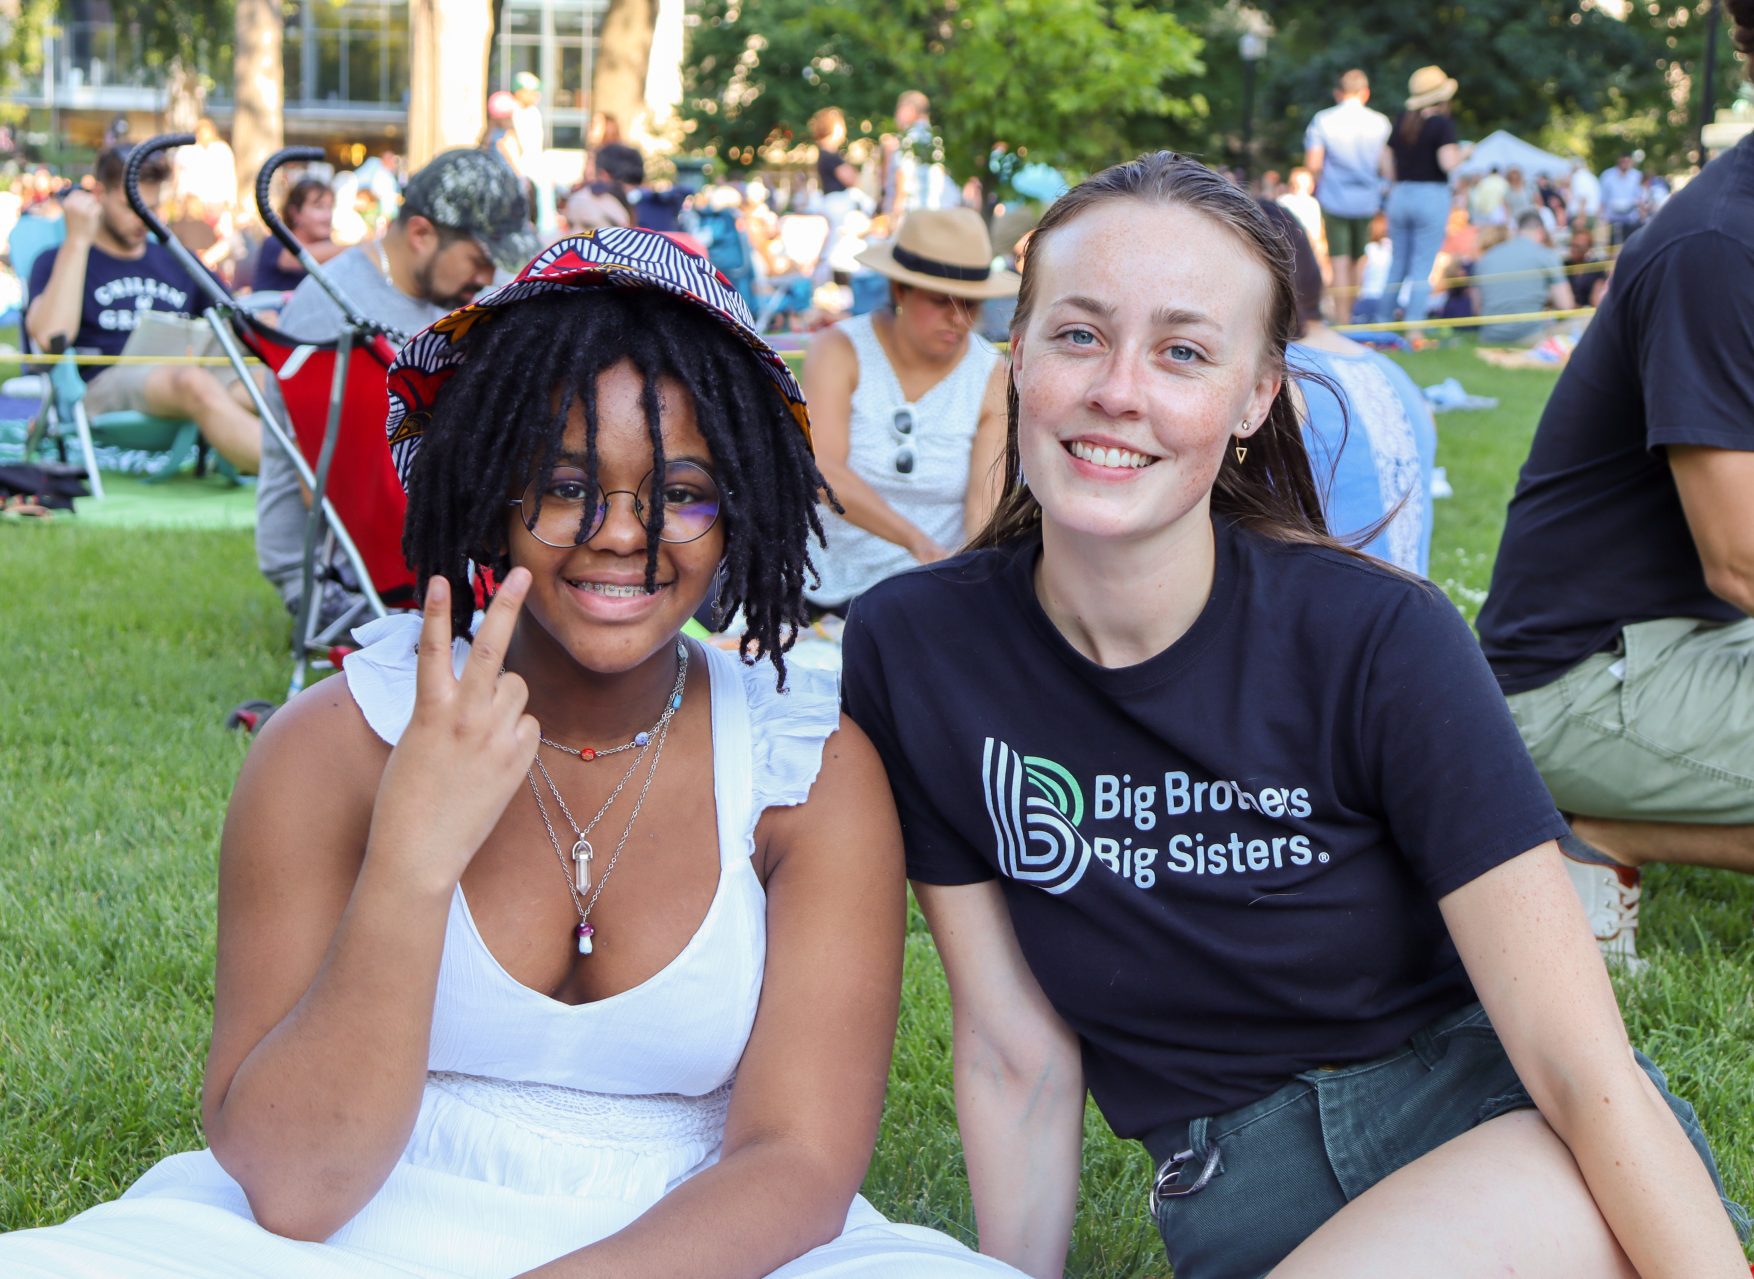 Big Sister Samantha Brown and Little Sister Clara Frazier at Concerts on the Square in Madison, WI